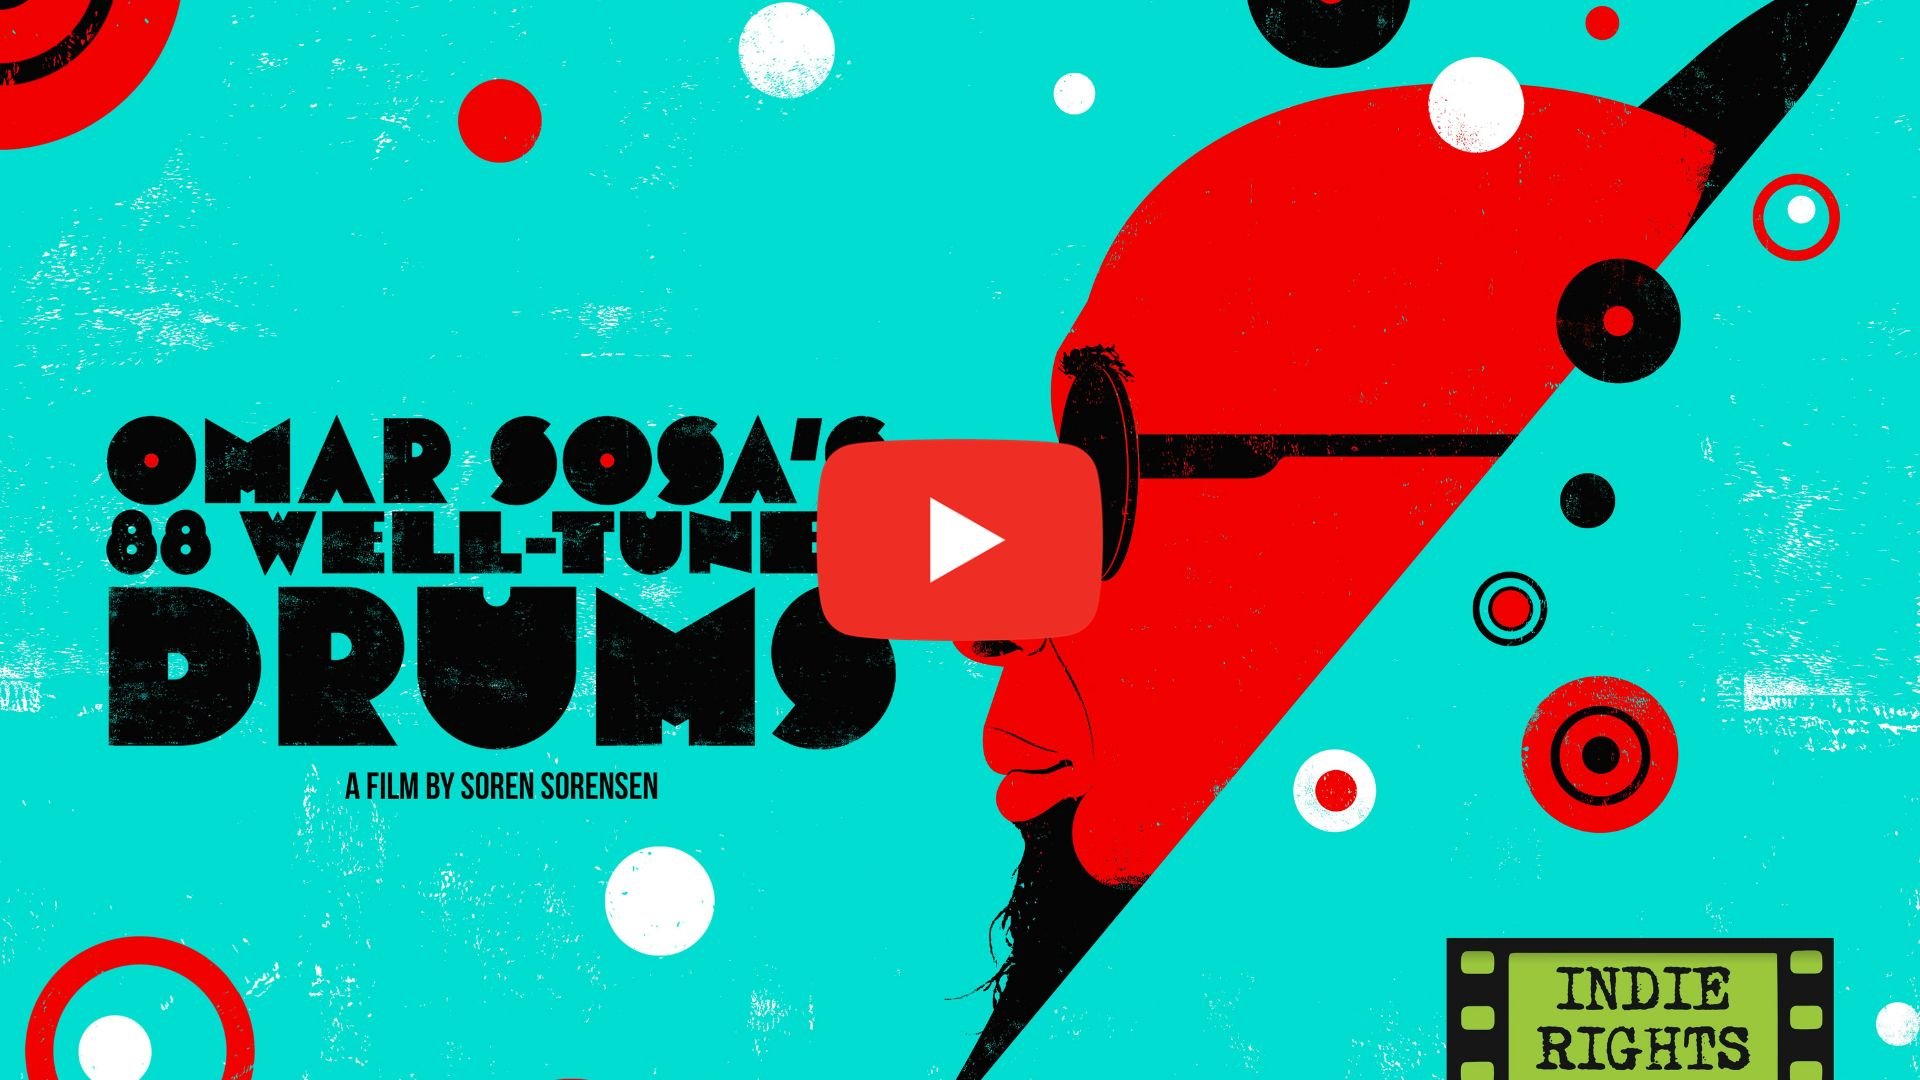 The sound track to Omar Sosa's 88 Well-Tuned Drums